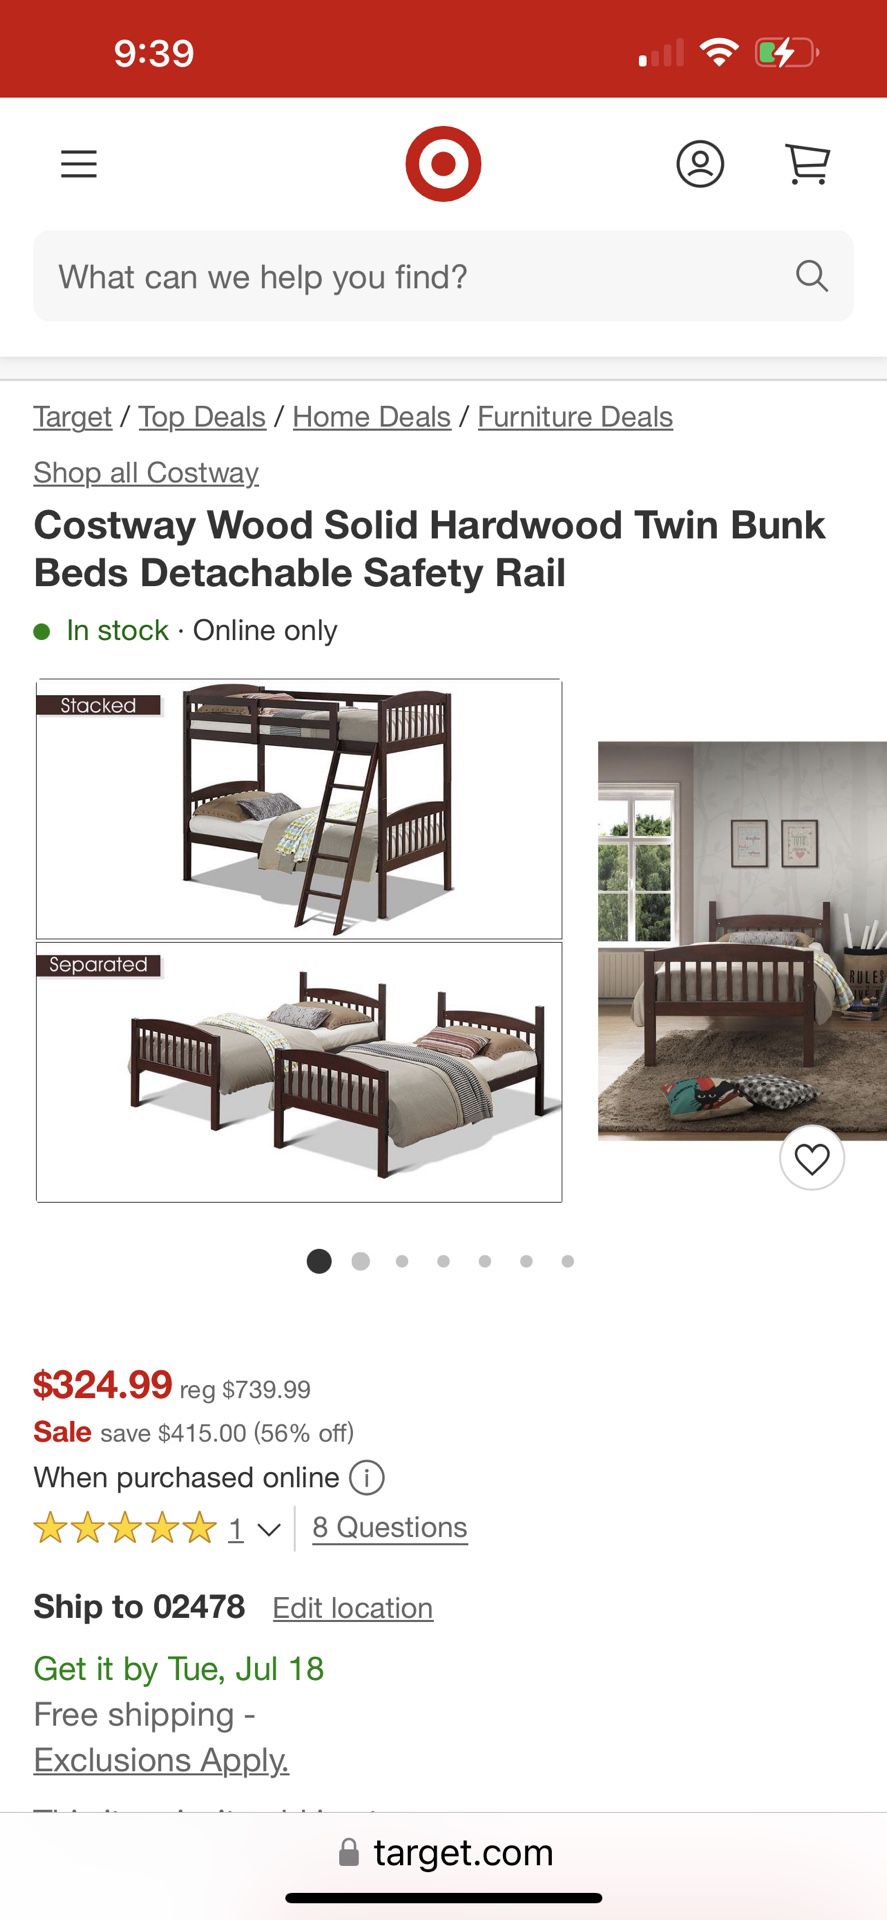 Bunk beds include mattresses